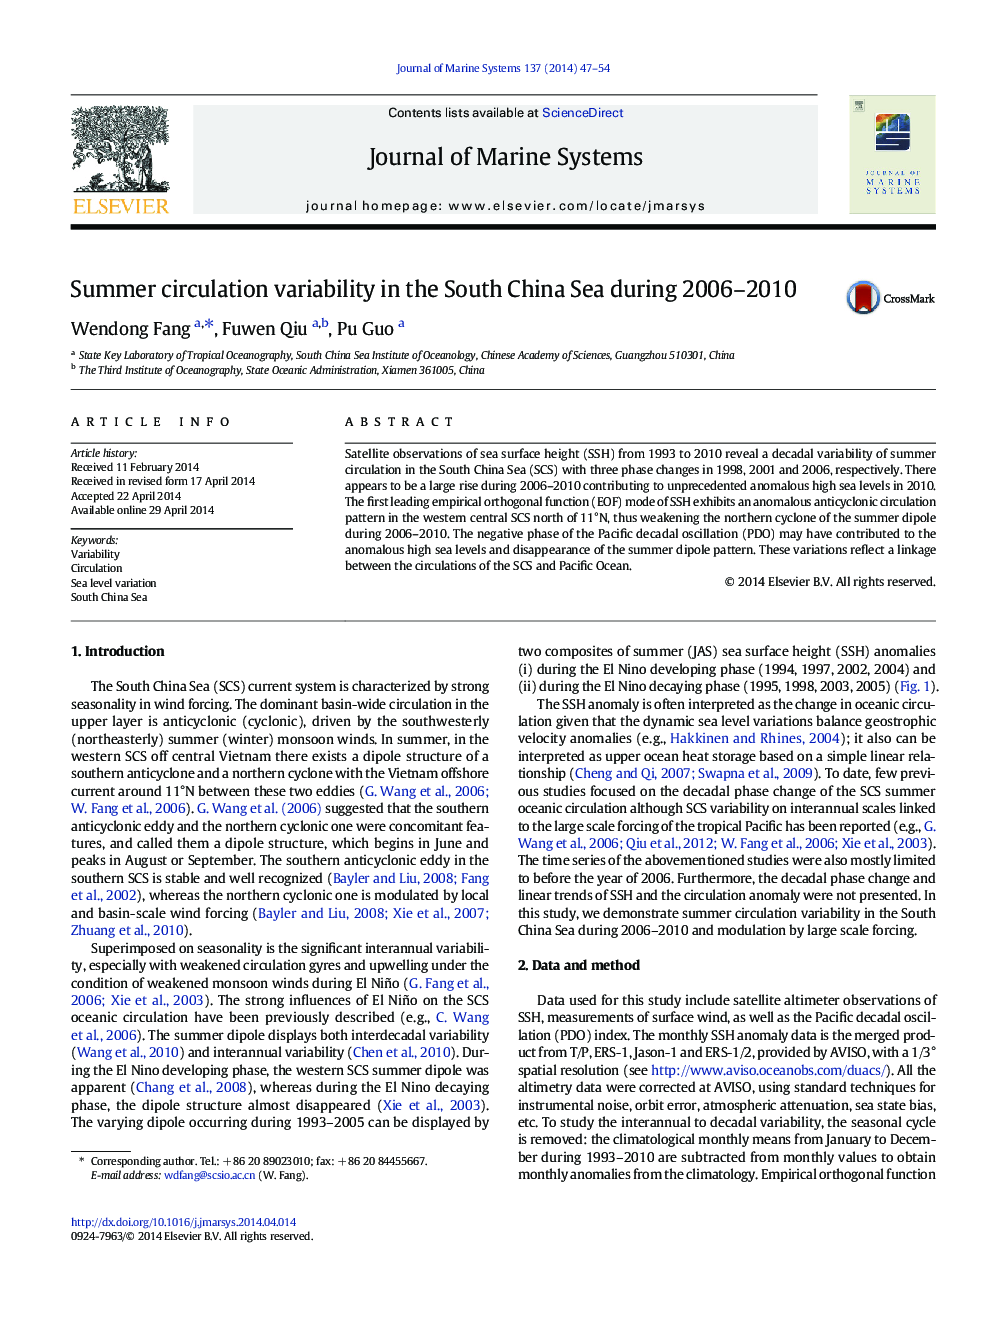 Summer circulation variability in the South China Sea during 2006–2010